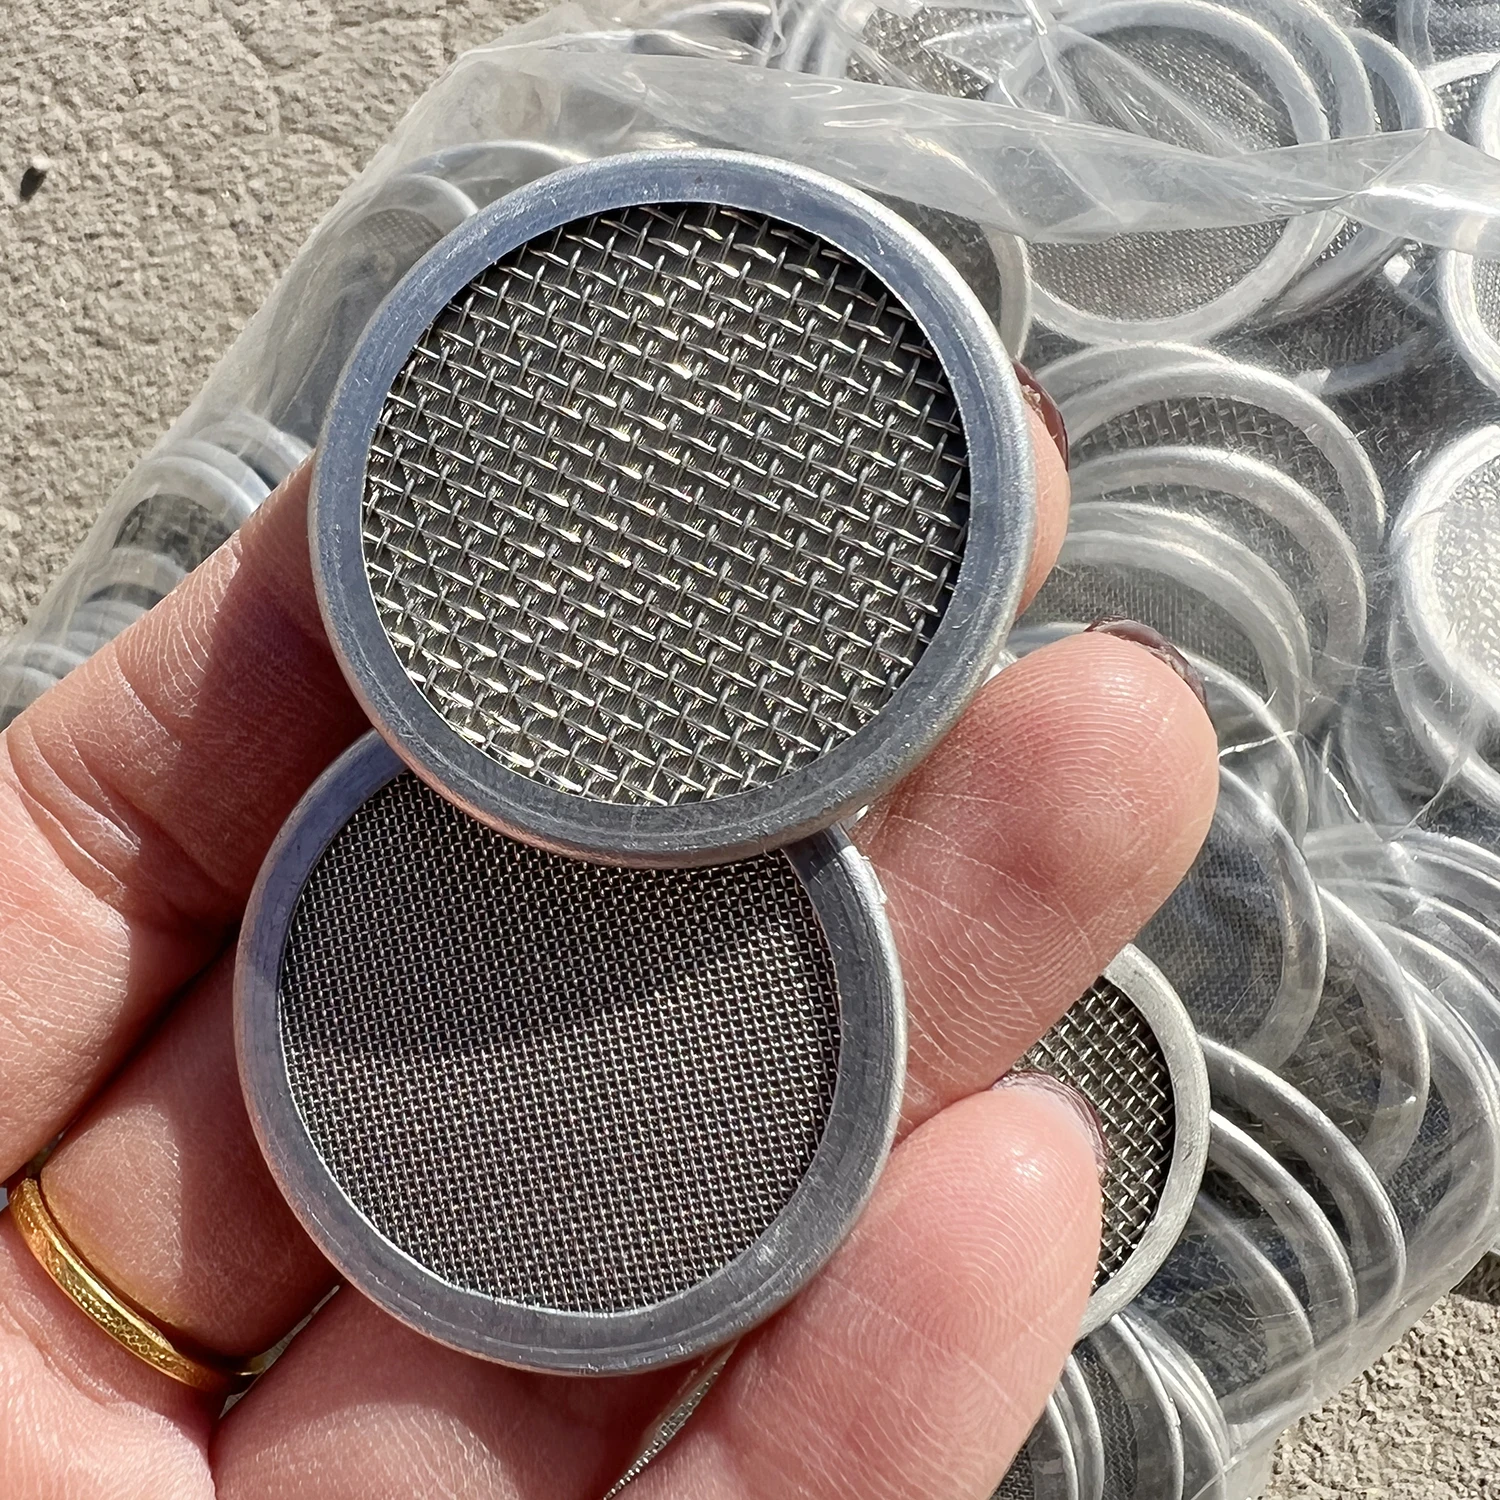 SS 304 316 Round Shape Plain Dutch Weave Extruder Screen Packs, Multi-layer Filter Screen, Filter Discs with Rimmed